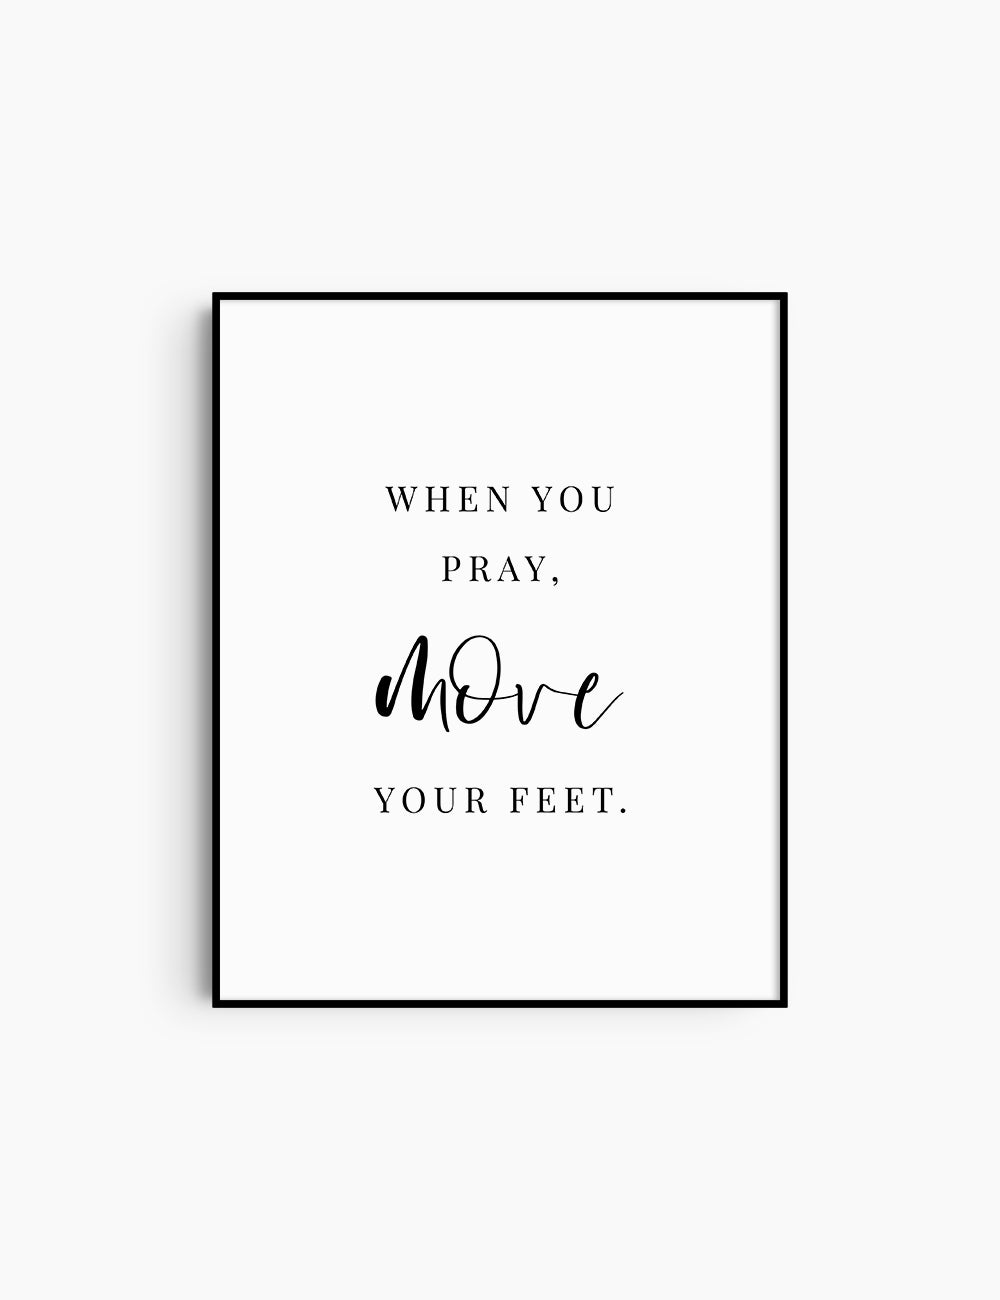 WHEN YOU PRAY, MOVE YOUR FEET. Printable Wall Art Quote. Custom Design.